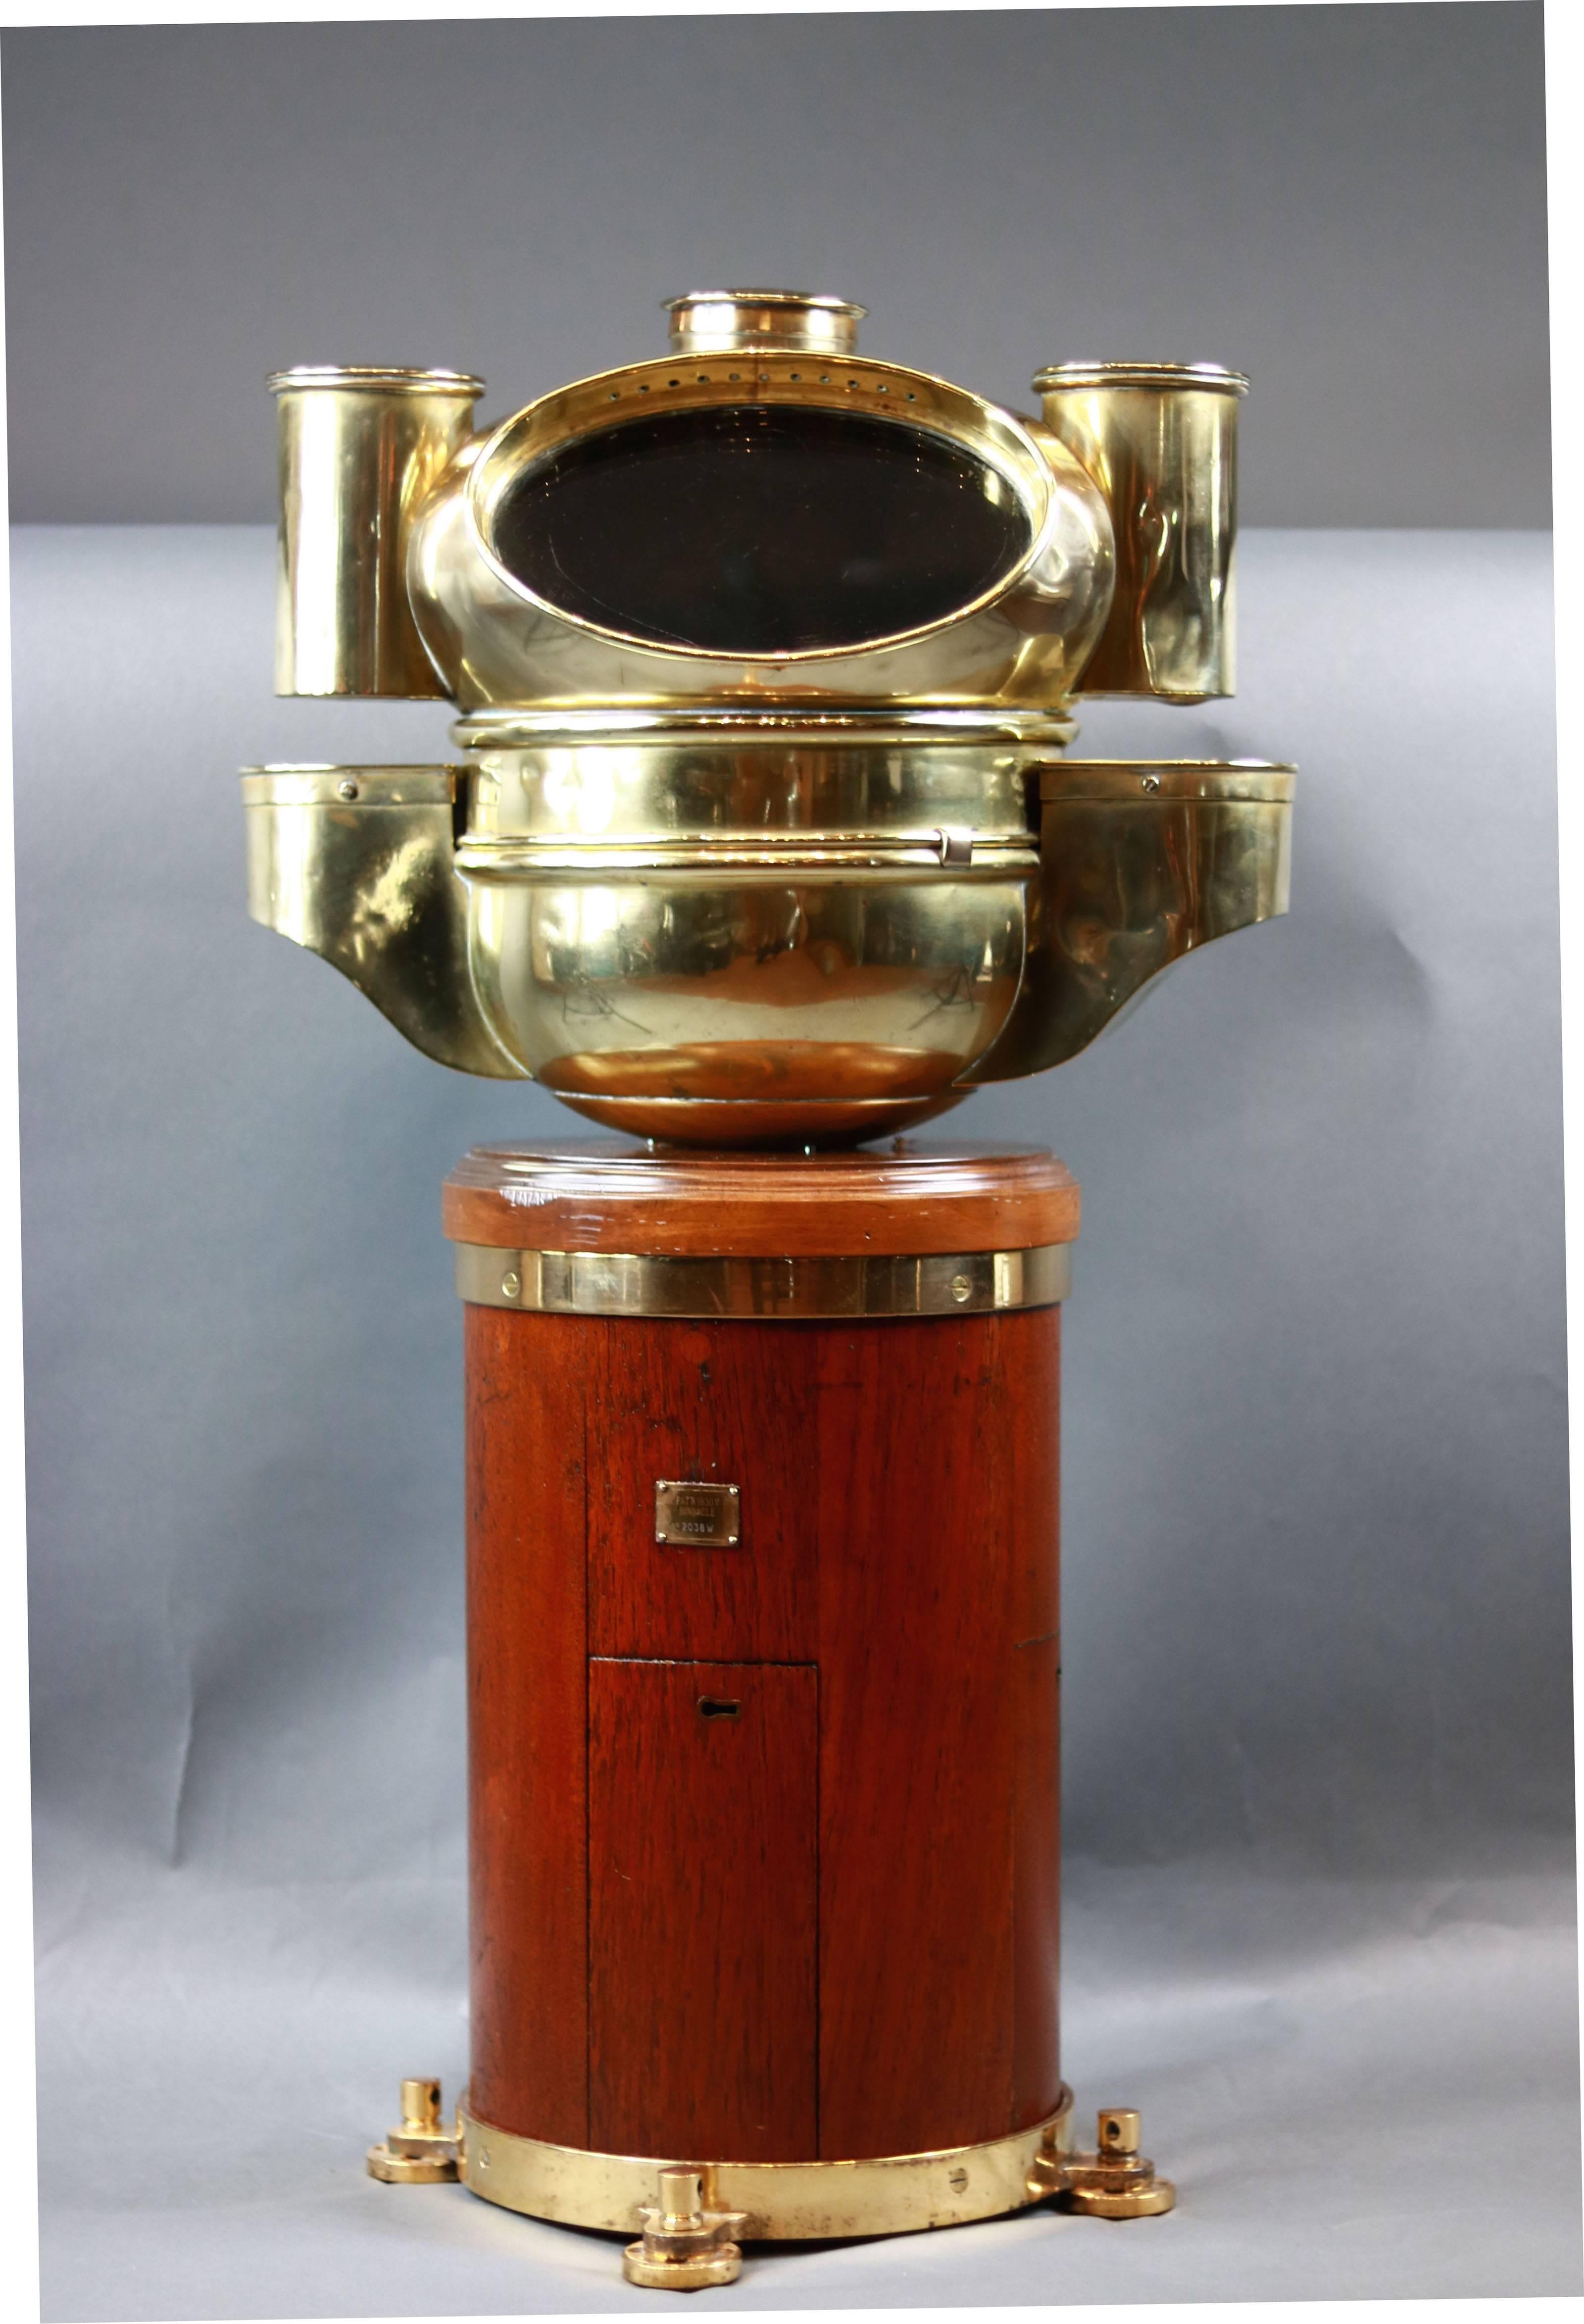 English yacht binnacle by Pascall Atkey of Cowes. Round, varnished mahogany base with brass feet. Hood is solid brass with side burner housing. Compass inside reads 